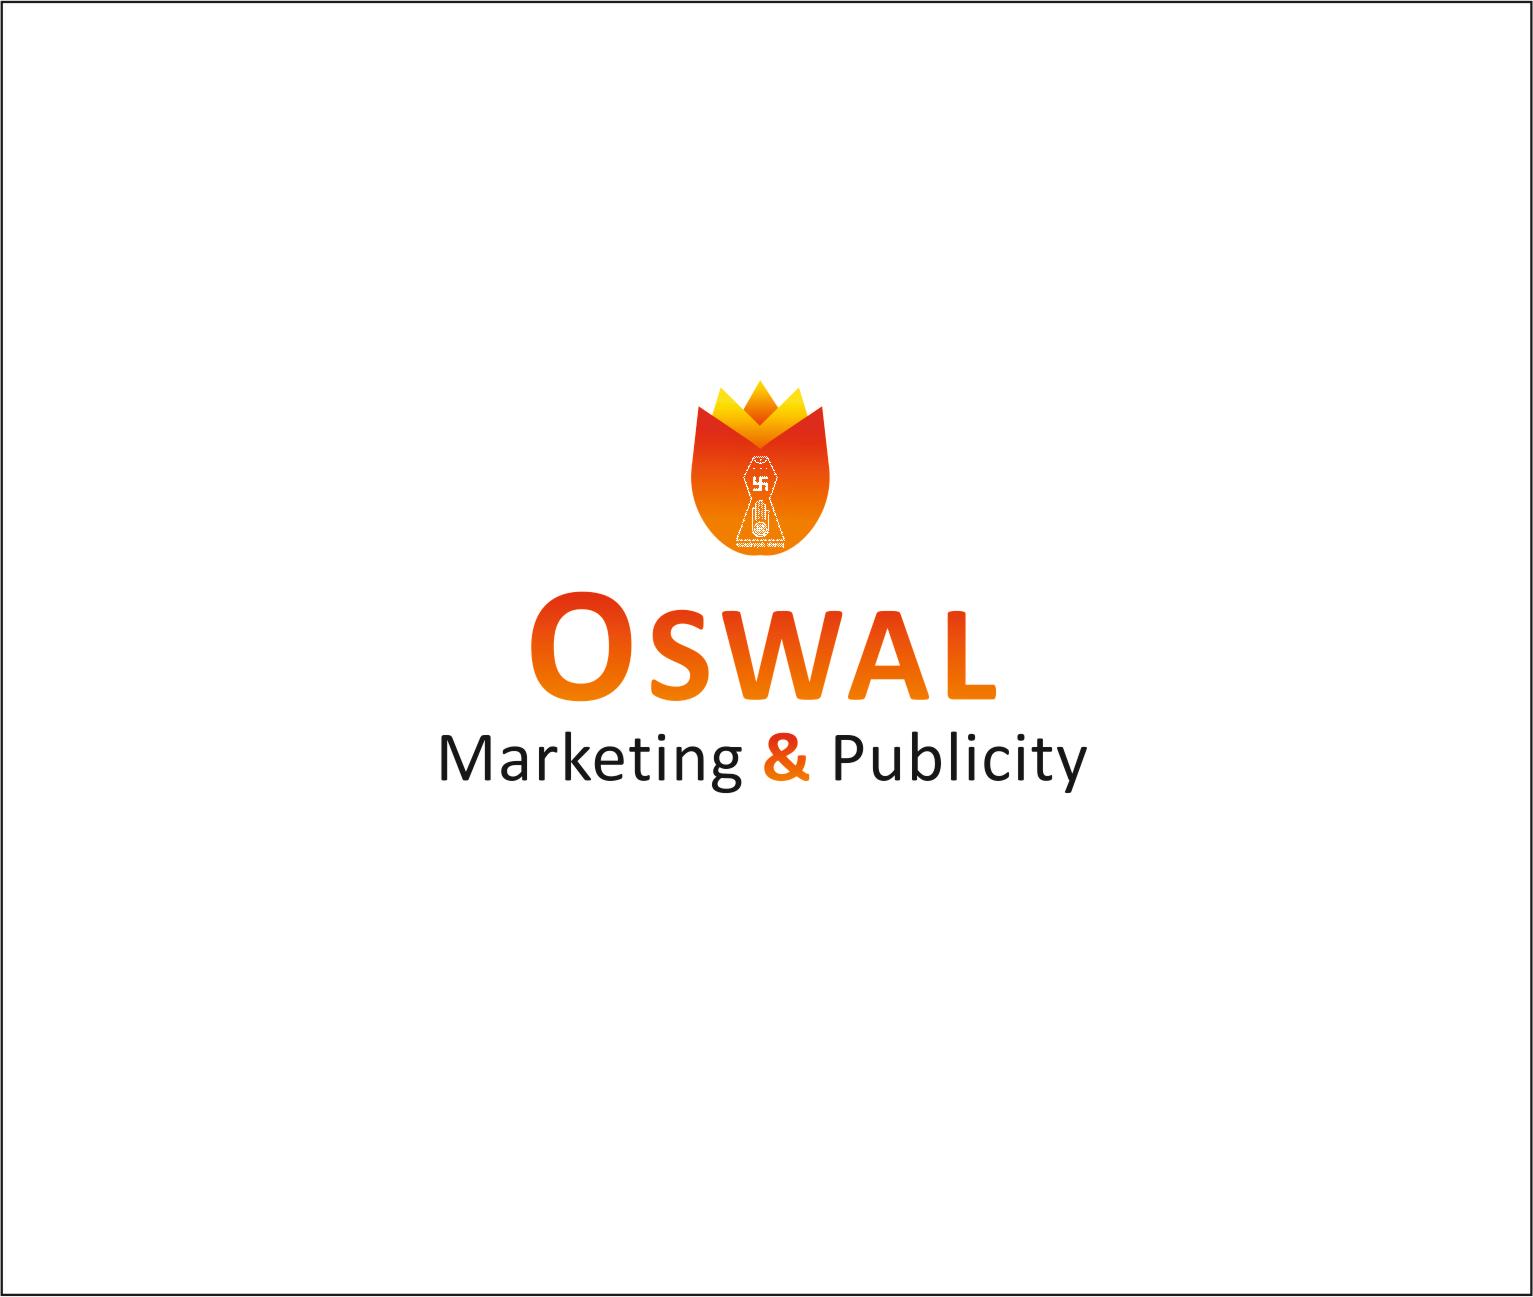 Oswal Marketing & Publicity